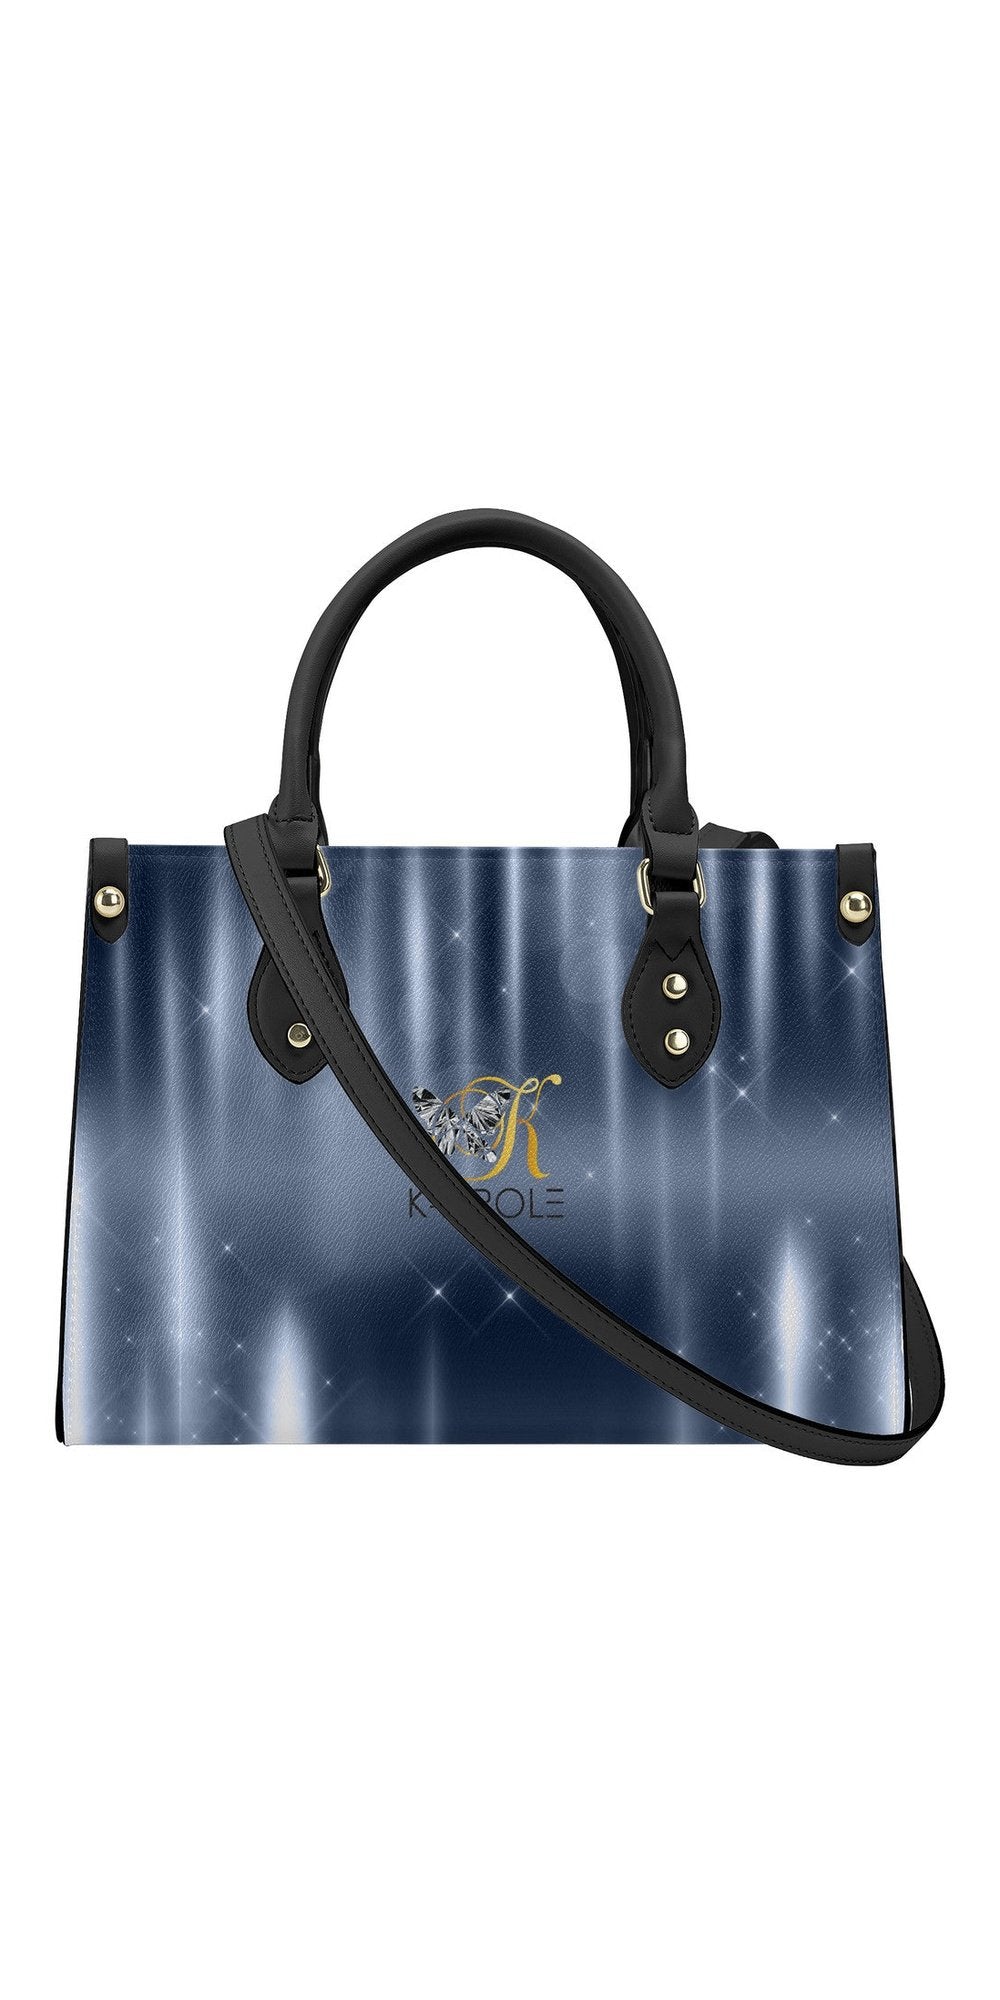 Blue Beauty: Embrace Elegance with Our Exquisite Blue Handbag Tote